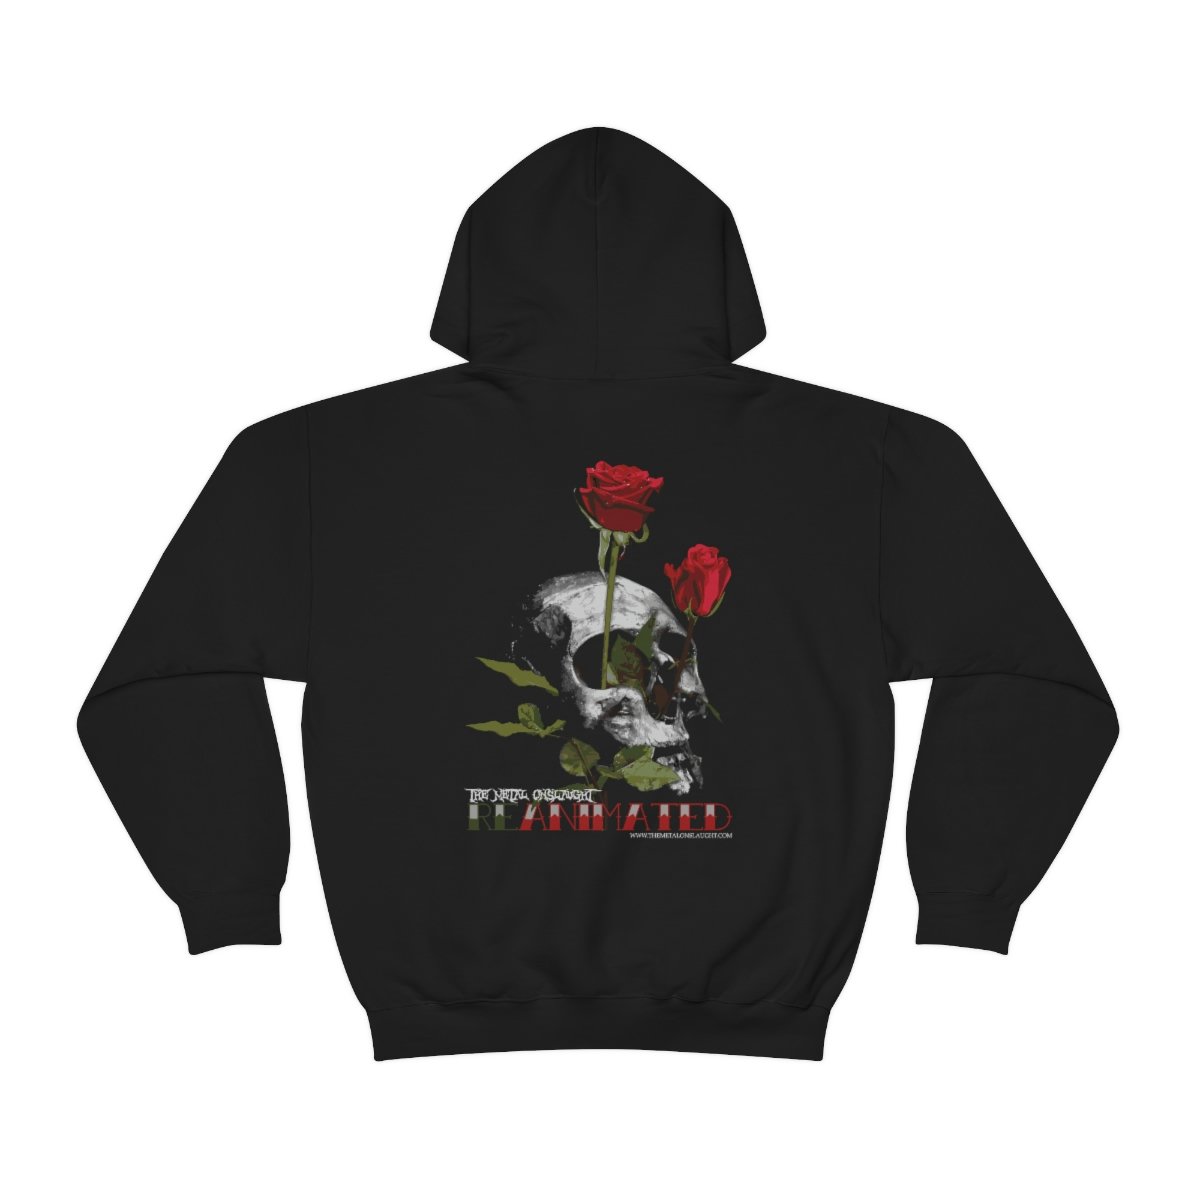 The Metal Onslaught Radio Show – Death To Life Pullover Hooded Sweatshirt